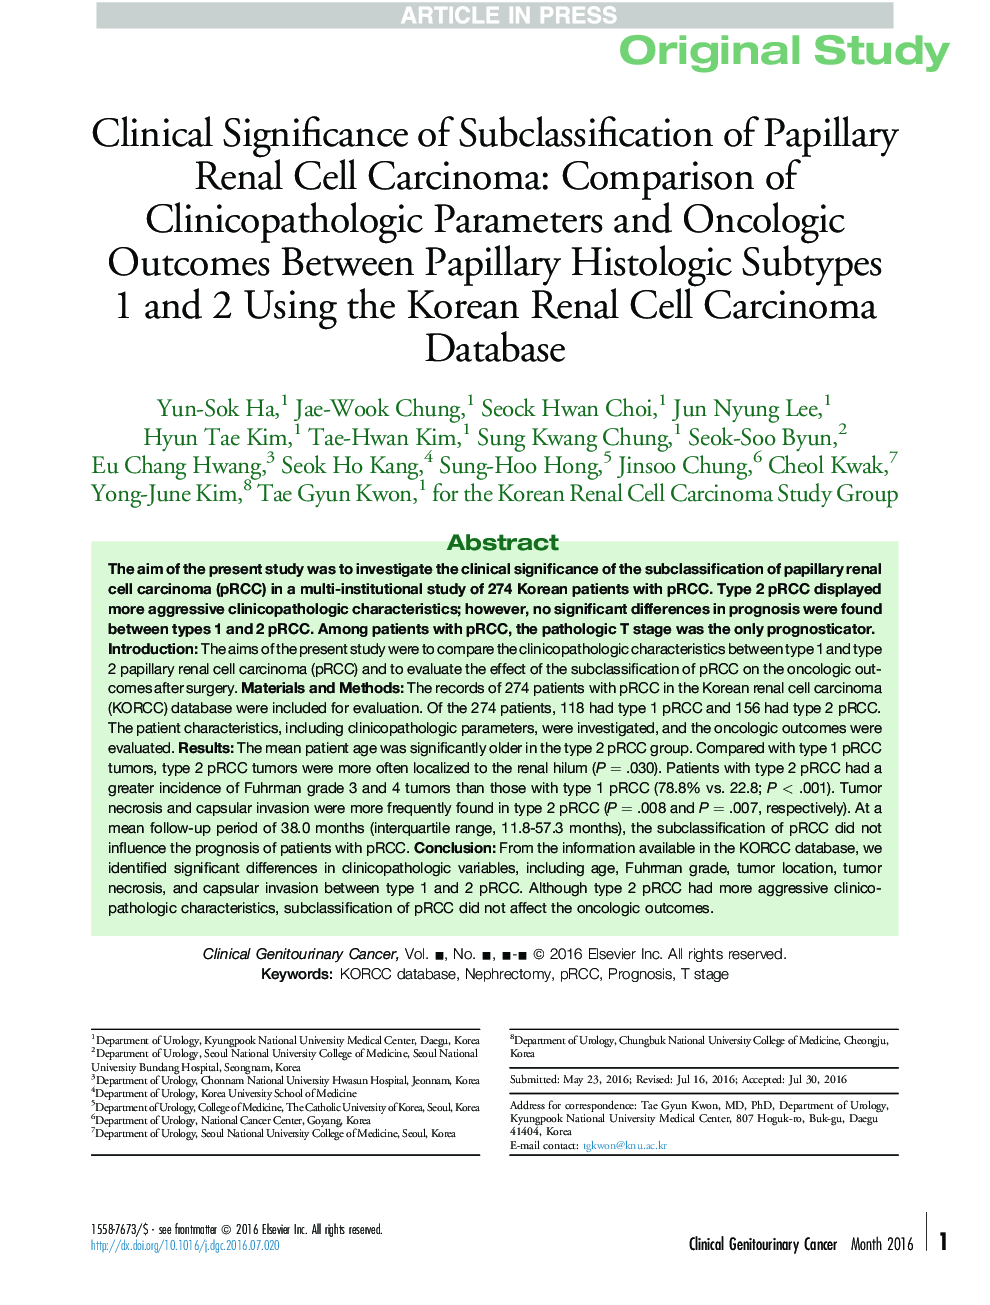 Clinical Significance of Subclassification of Papillary Renal Cell Carcinoma: Comparison of Clinicopathologic Parameters and Oncologic Outcomes Between Papillary Histologic Subtypes 1Â and 2 Using the Korean Renal Cell Carcinoma Database